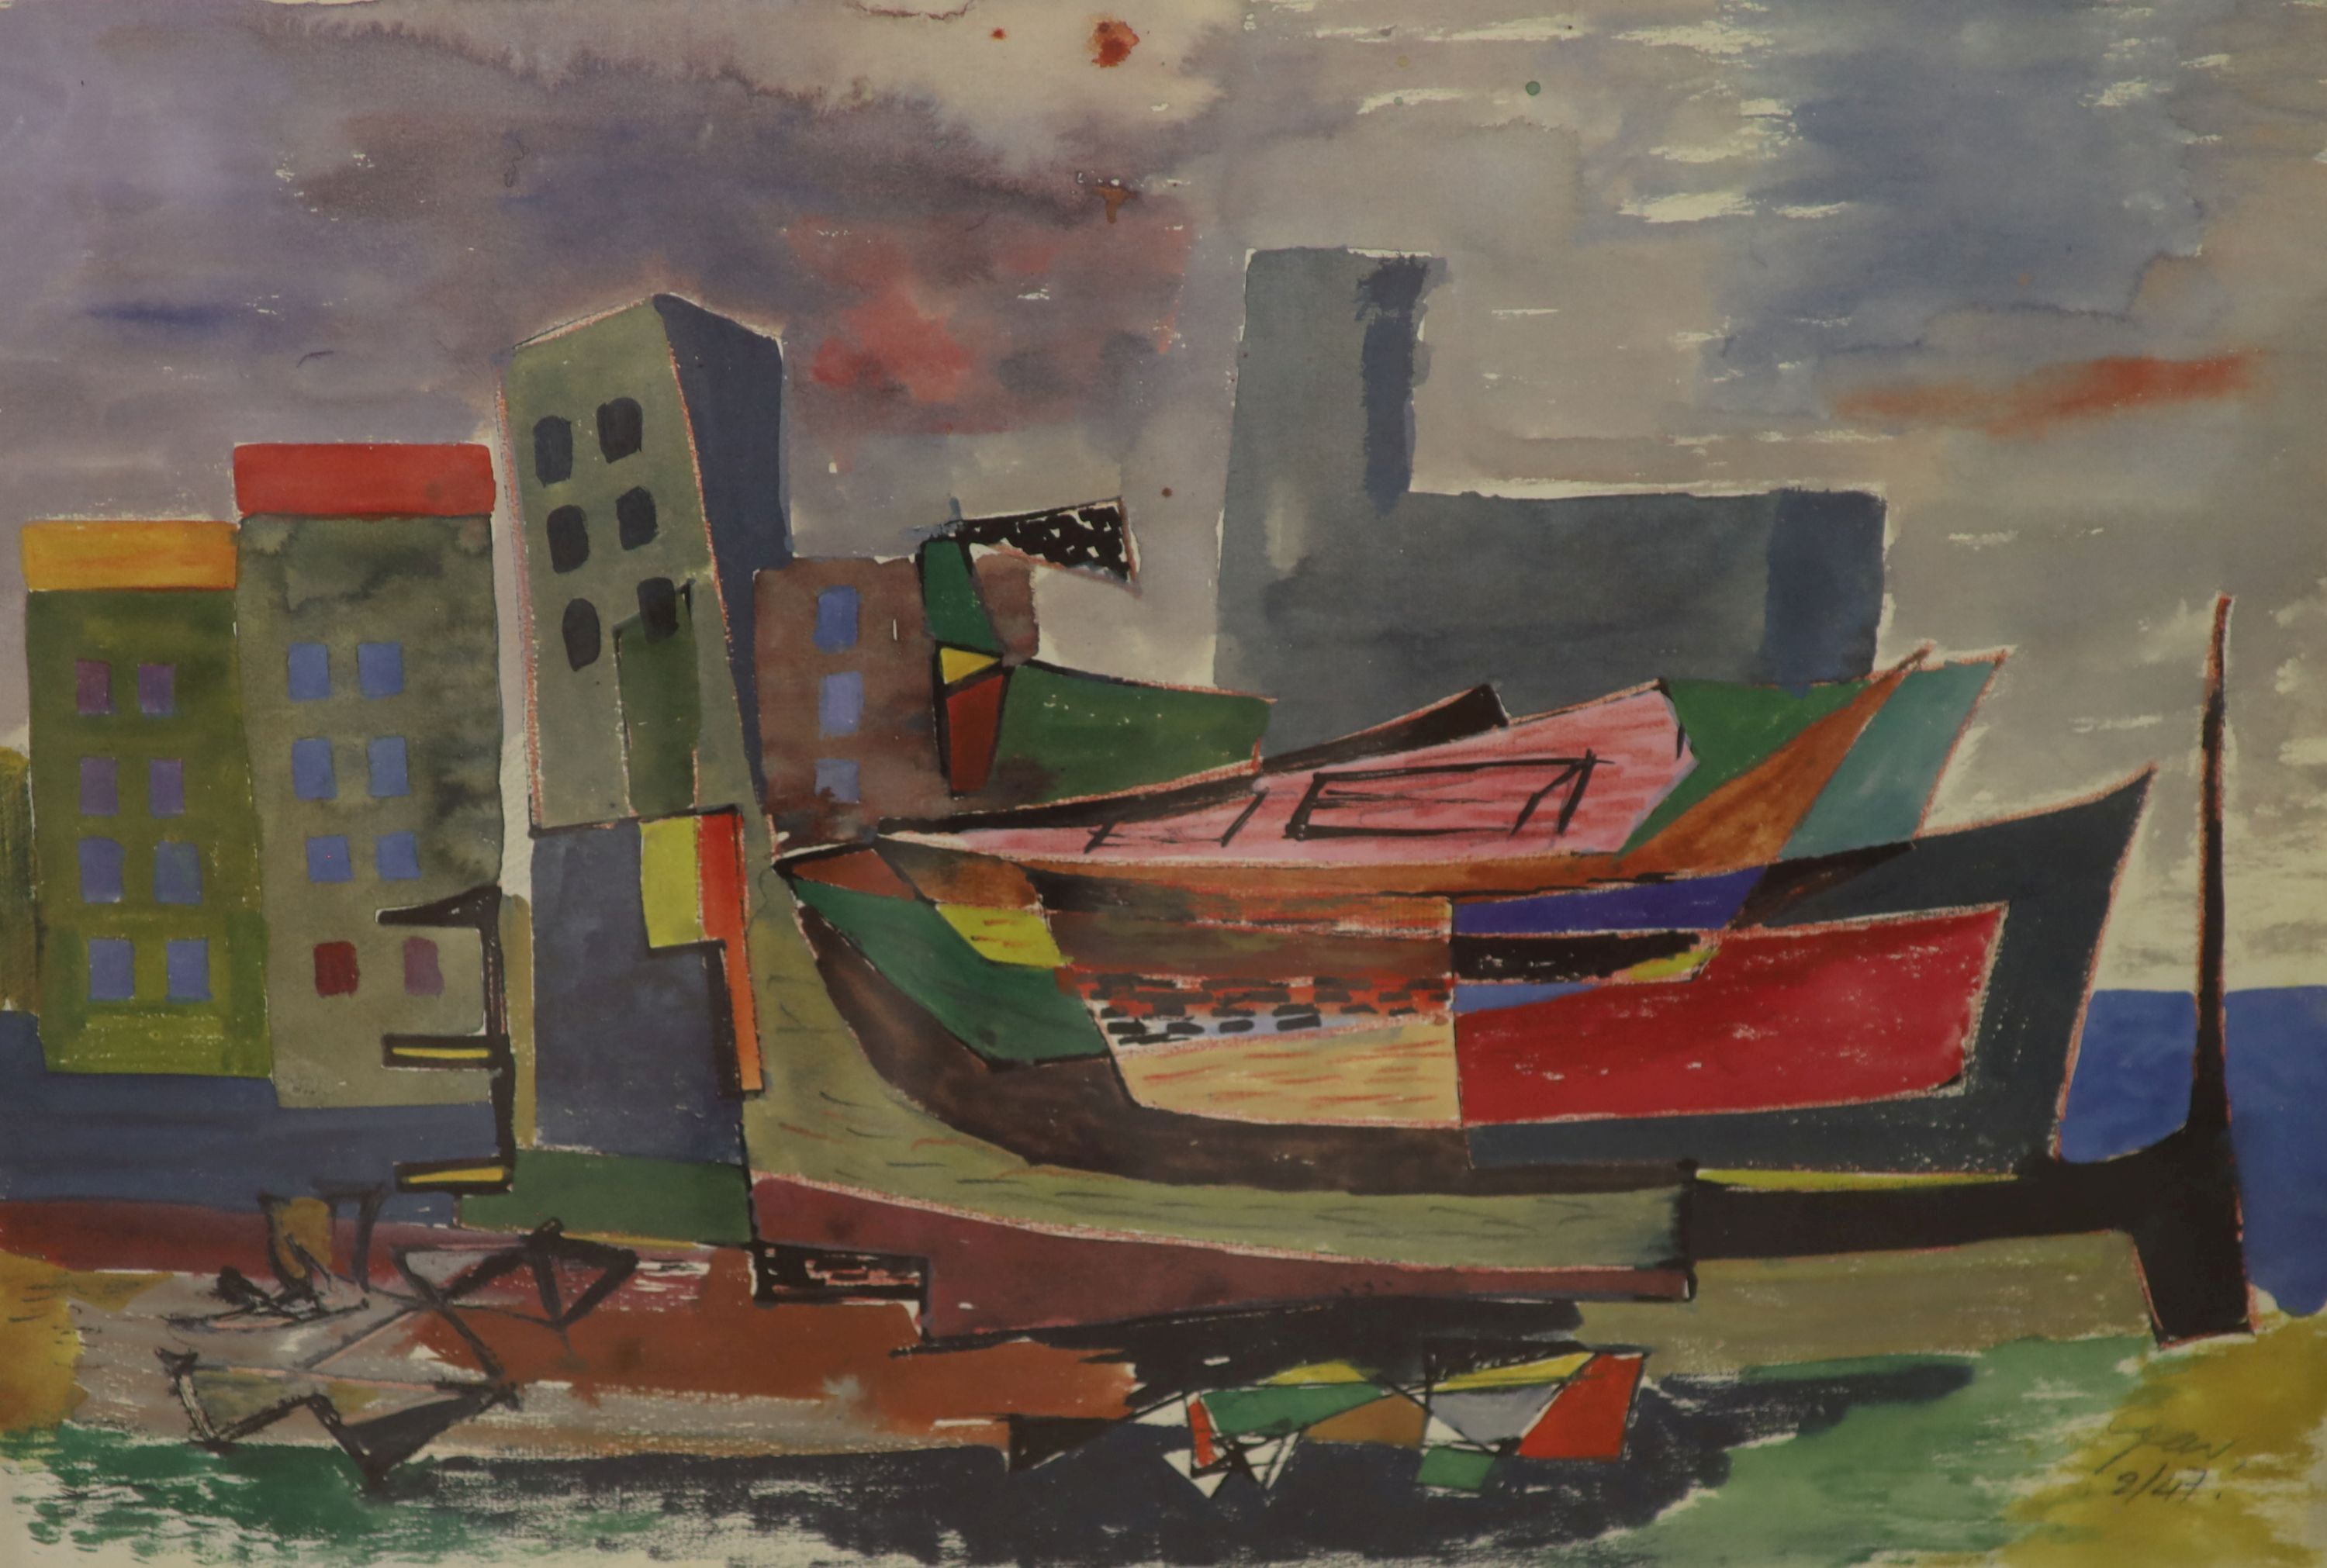 William Gear RA (1915-1997), offset lithograph in colours, Boats and Buildings, 1947, 29.5 x 44cm